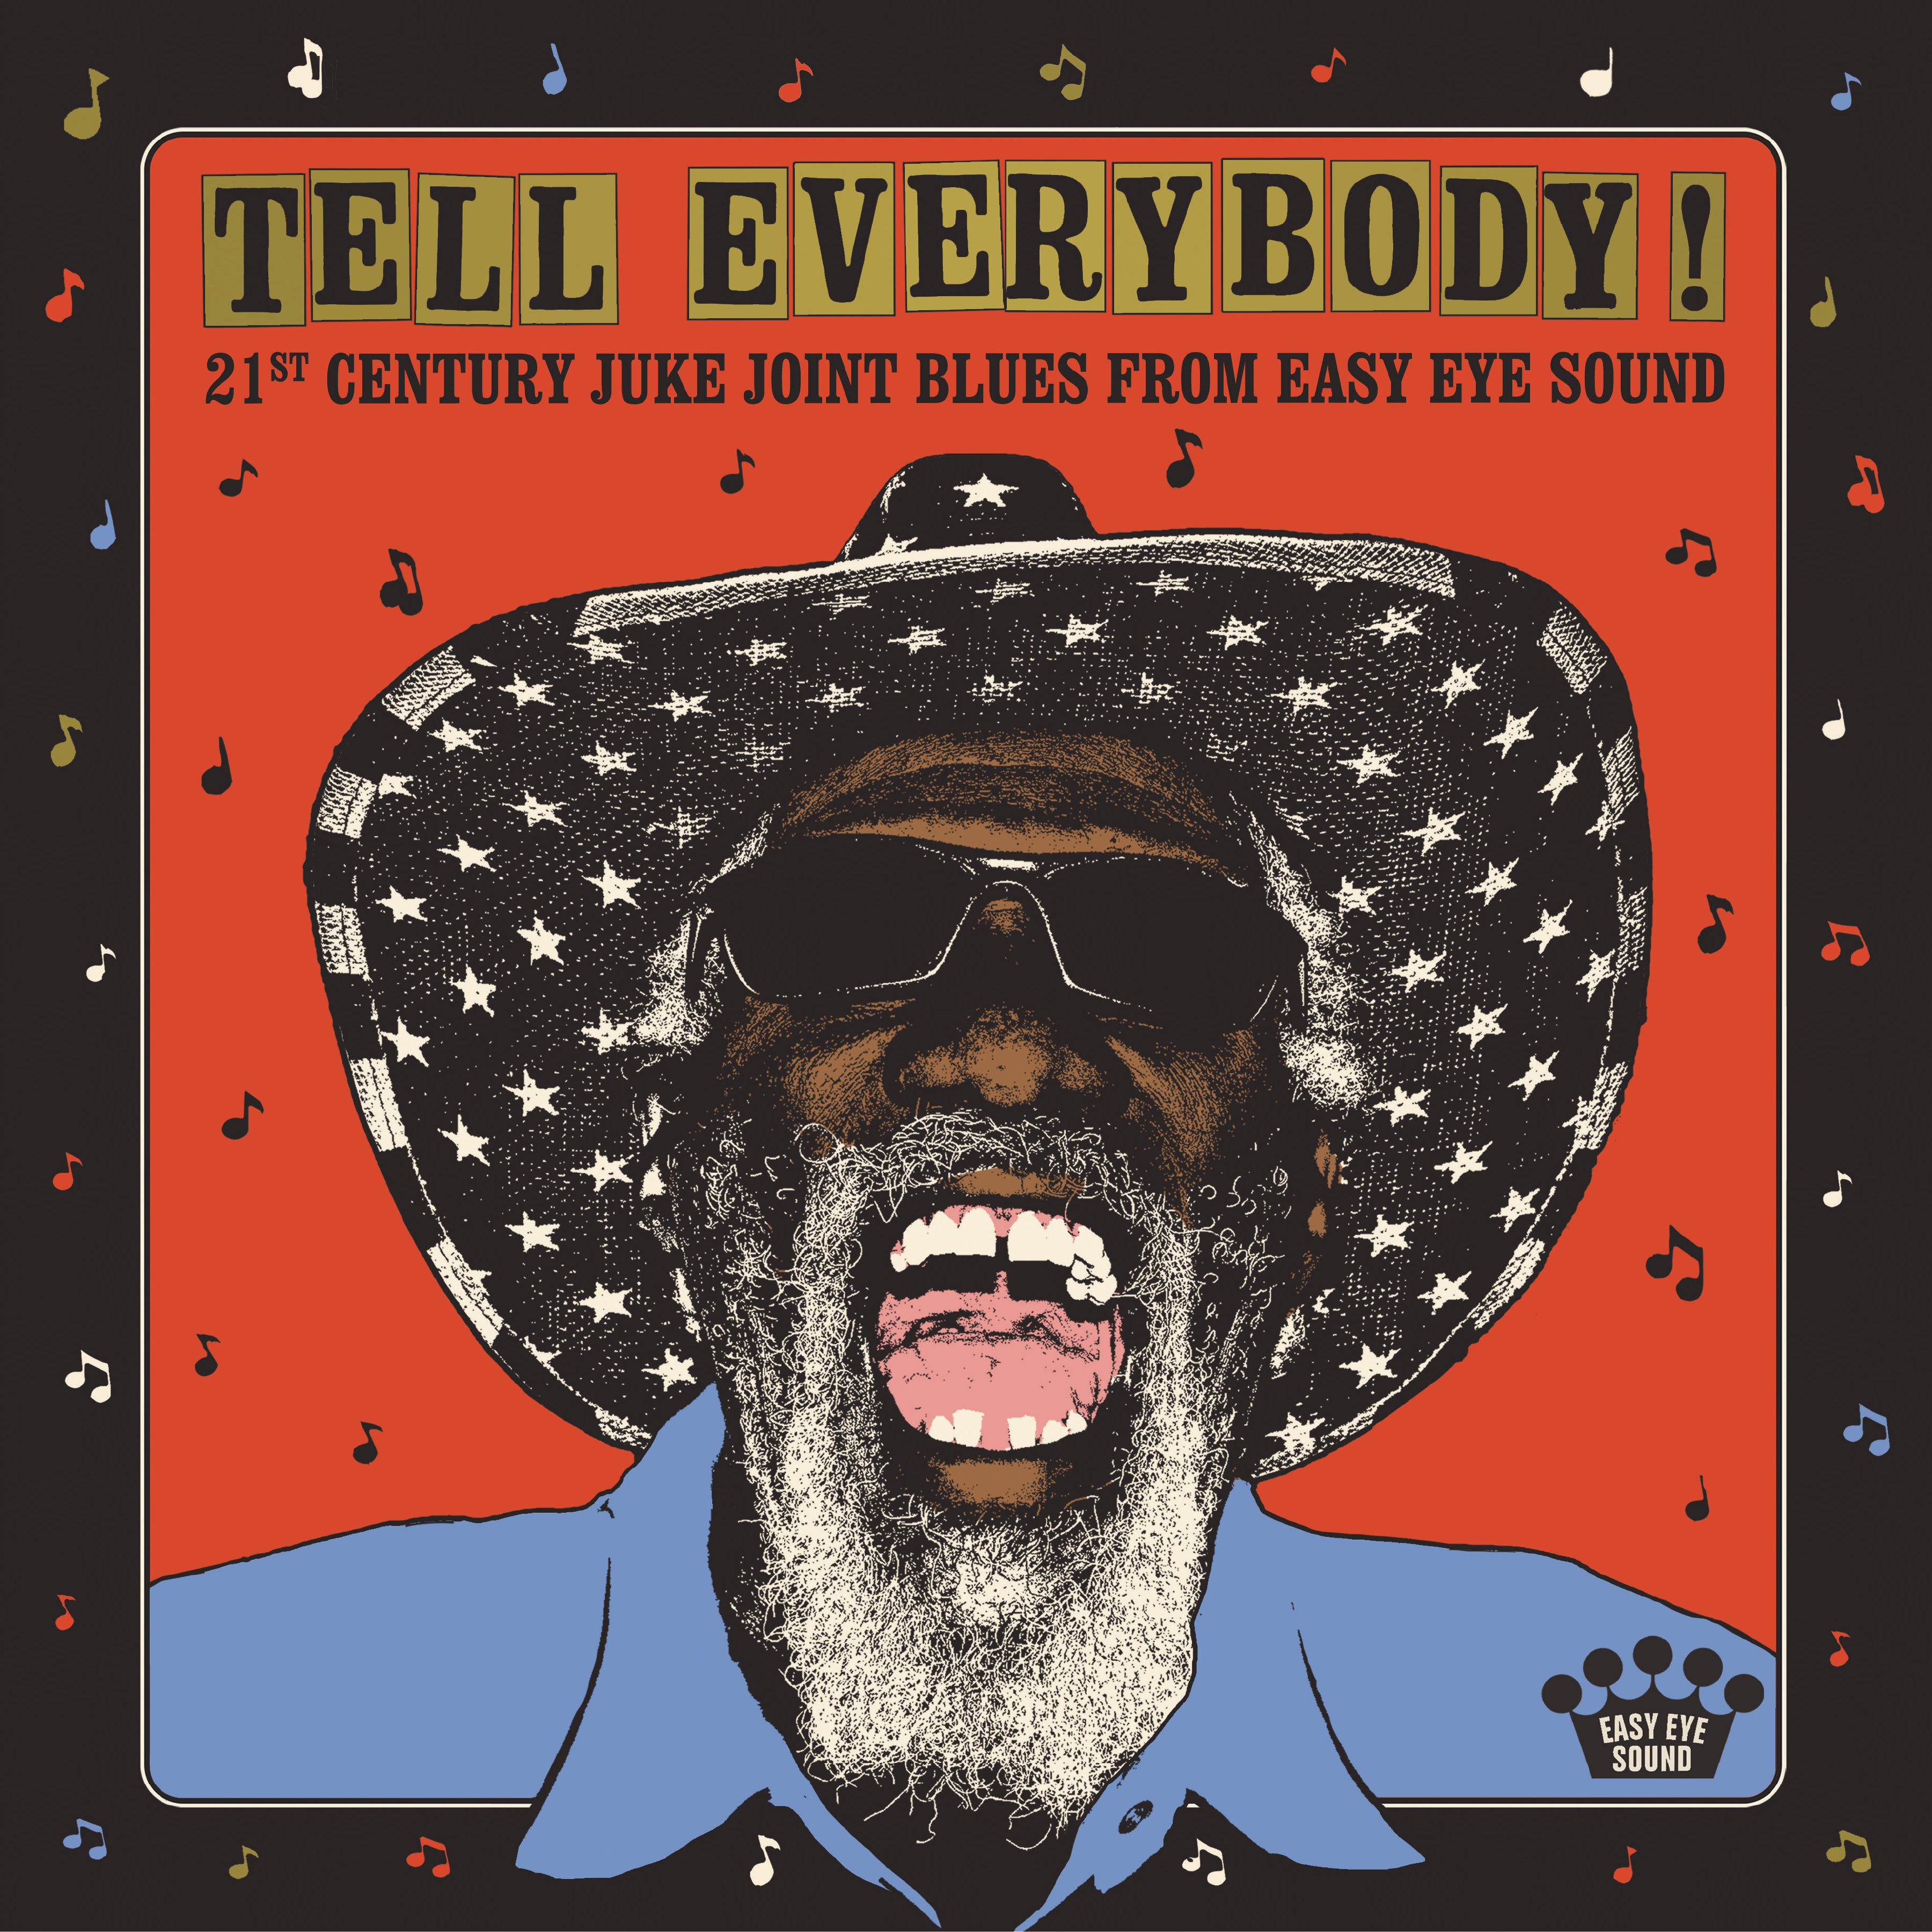 LISTEN TO “TELL EVERYBODY” BY ROBERT FINLEY FROM THE UPCOMING BLUES COMPILATION NOW